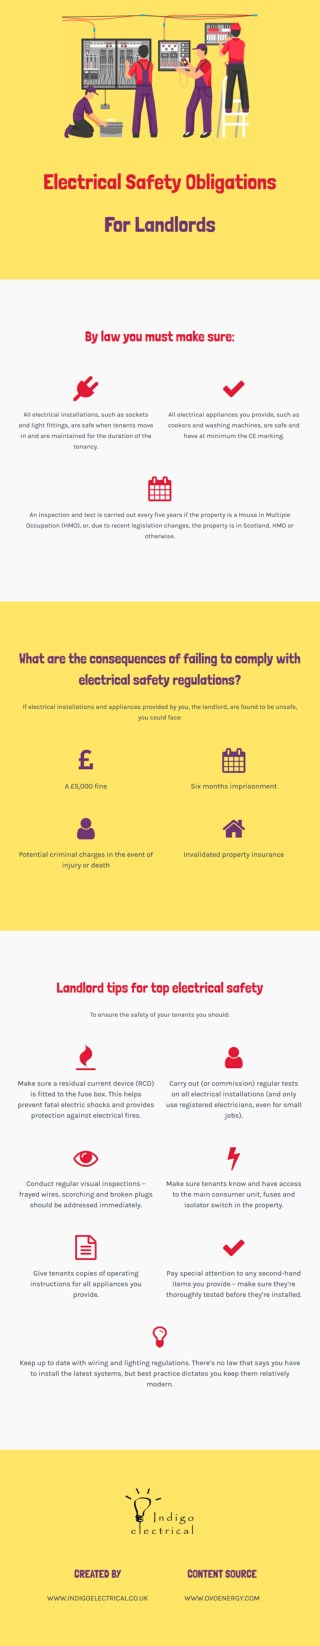 Electrical Safety Obligations for Landlords